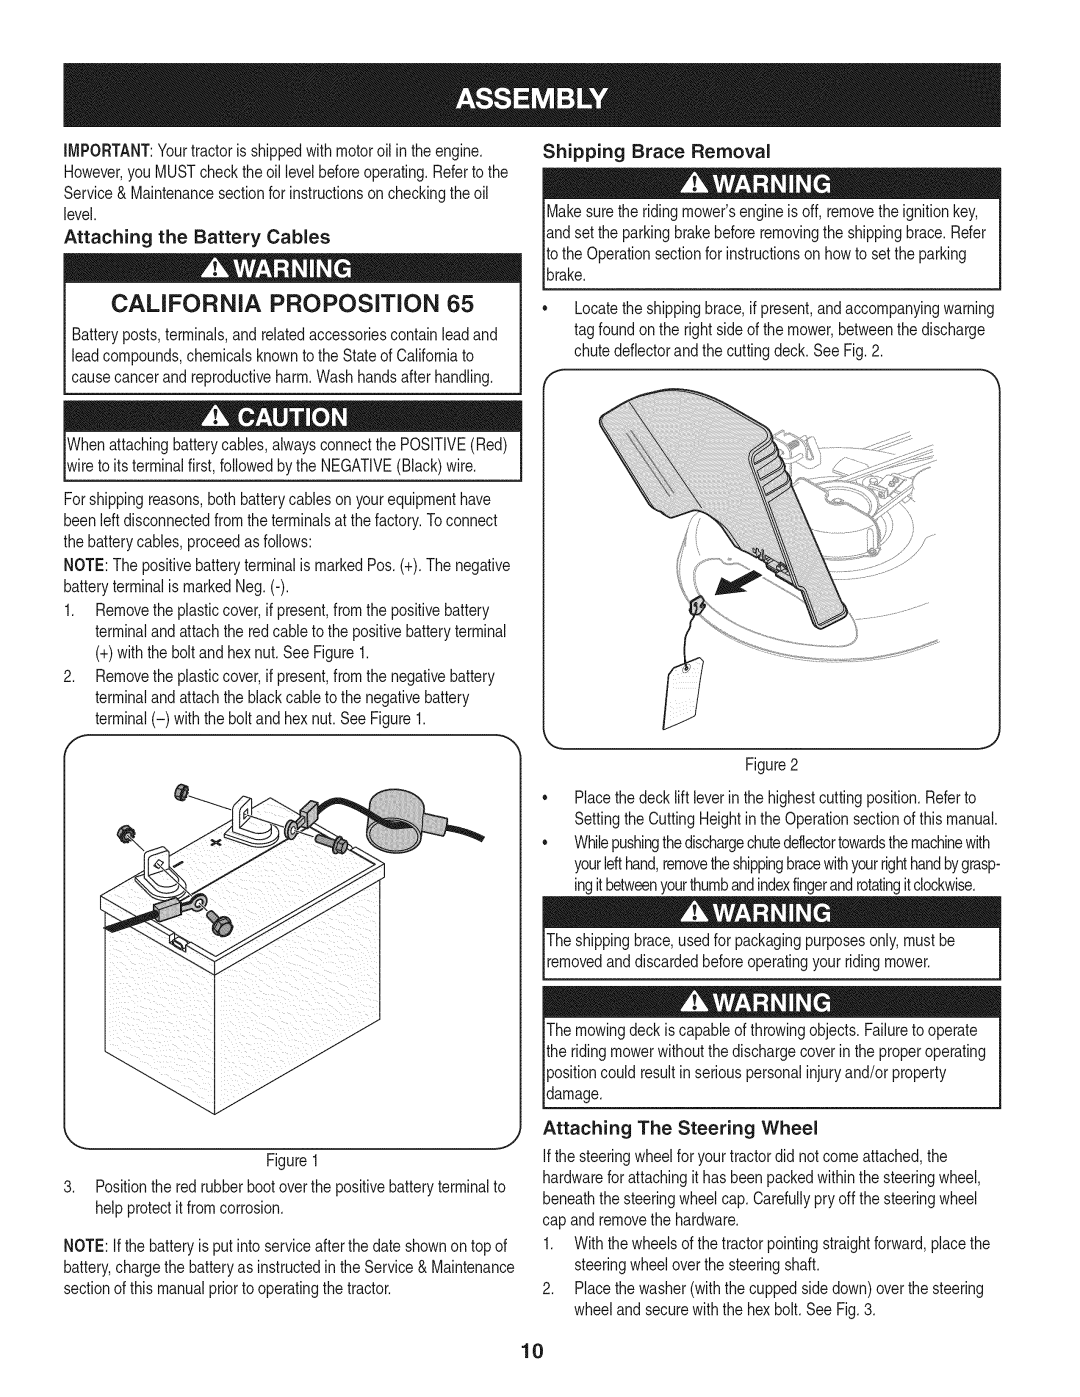 Craftsman 247.28902 manual California Proposition, Attaching the Battery Cables 